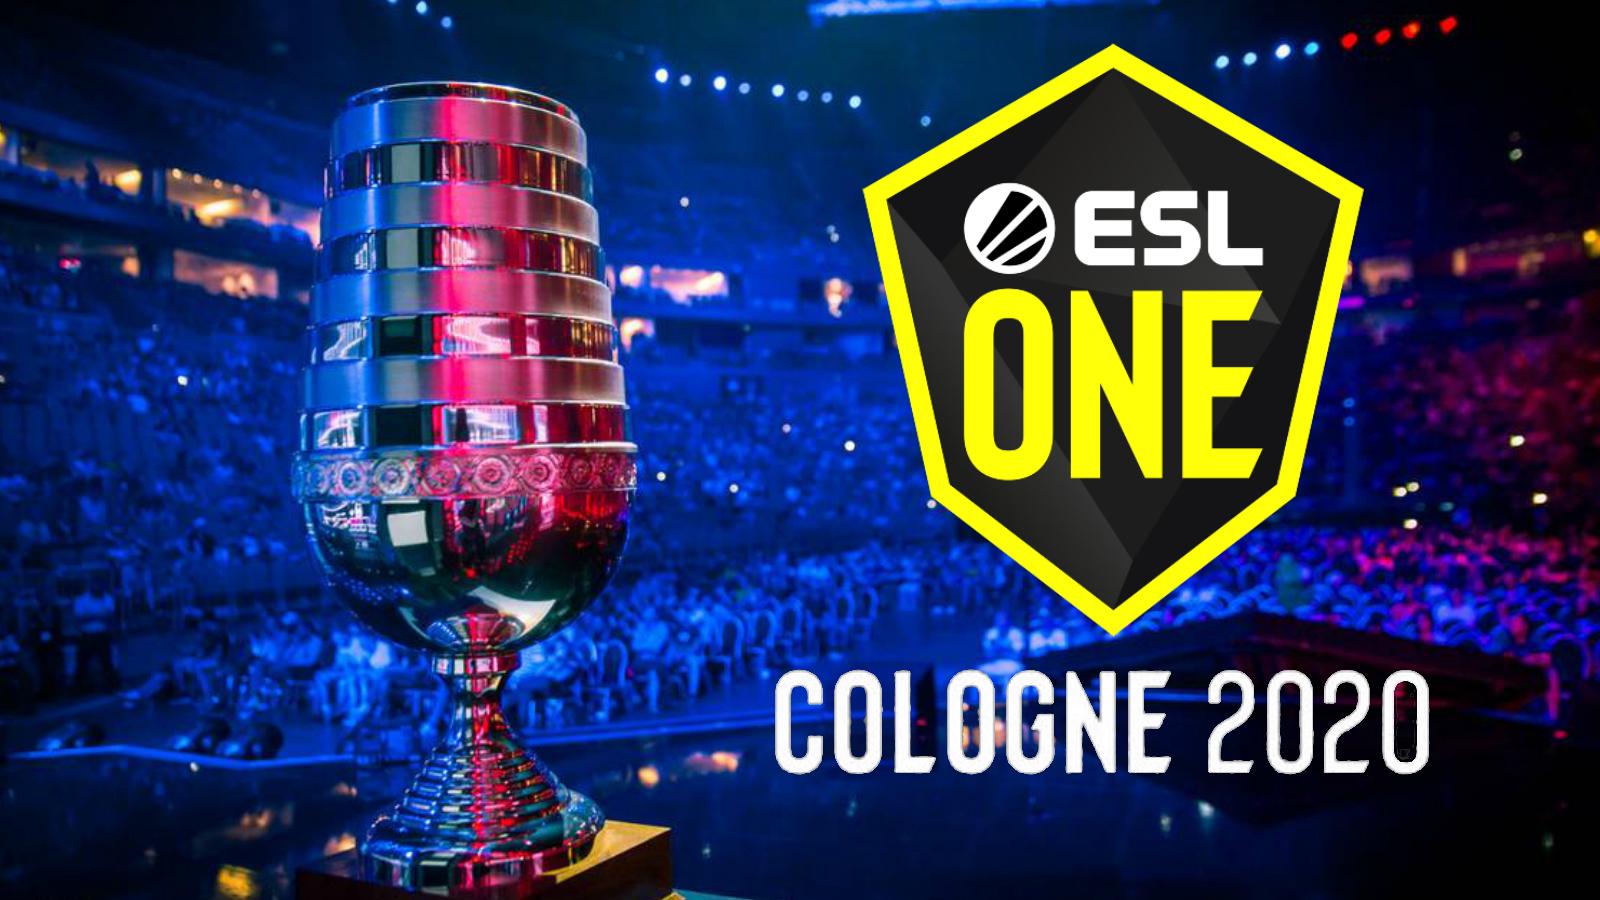 ESL One Cologne trophy and logo